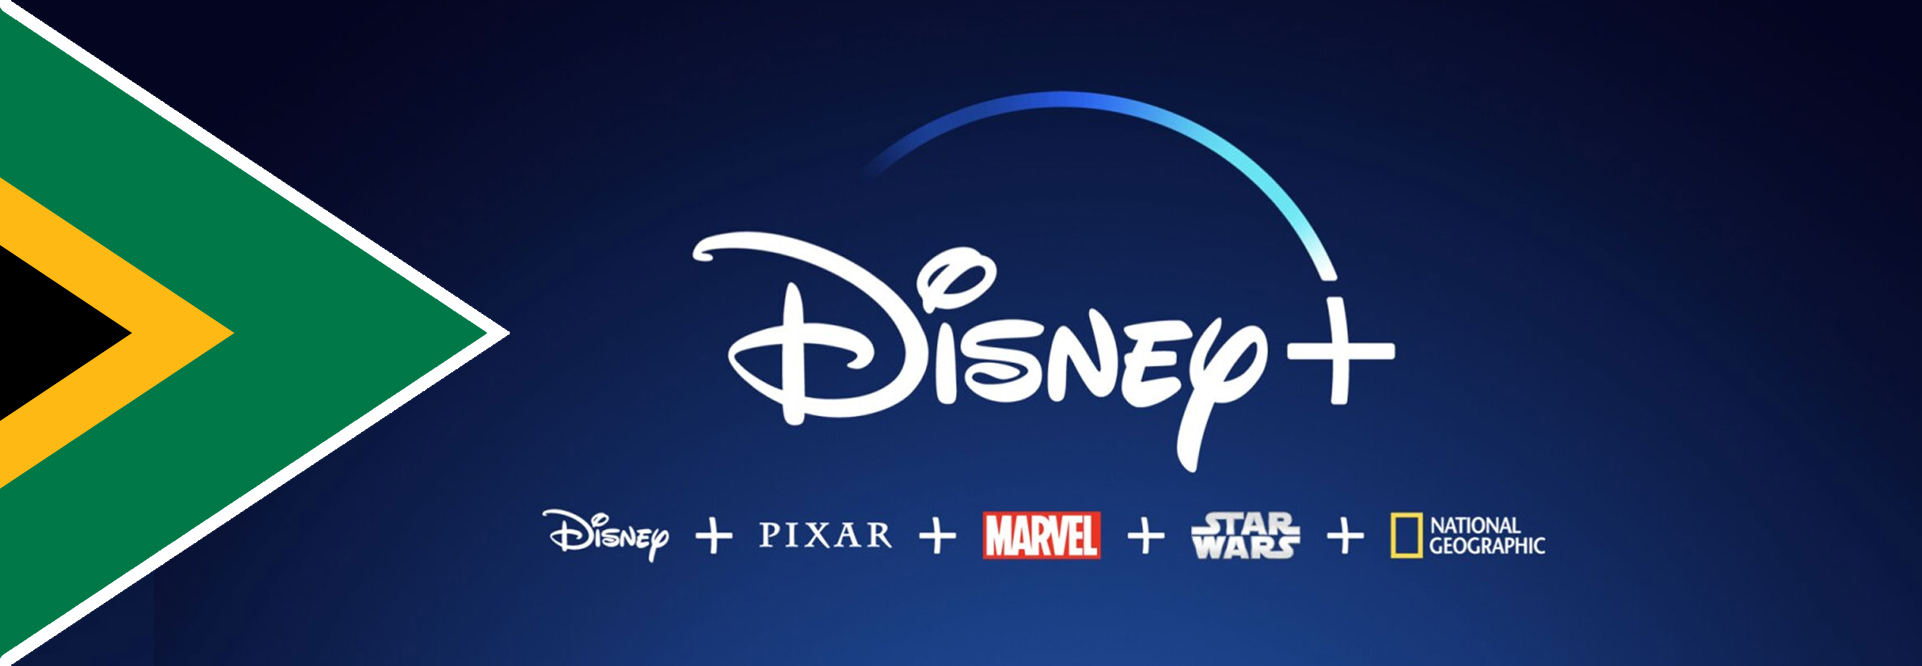 Disney+ in South Africa